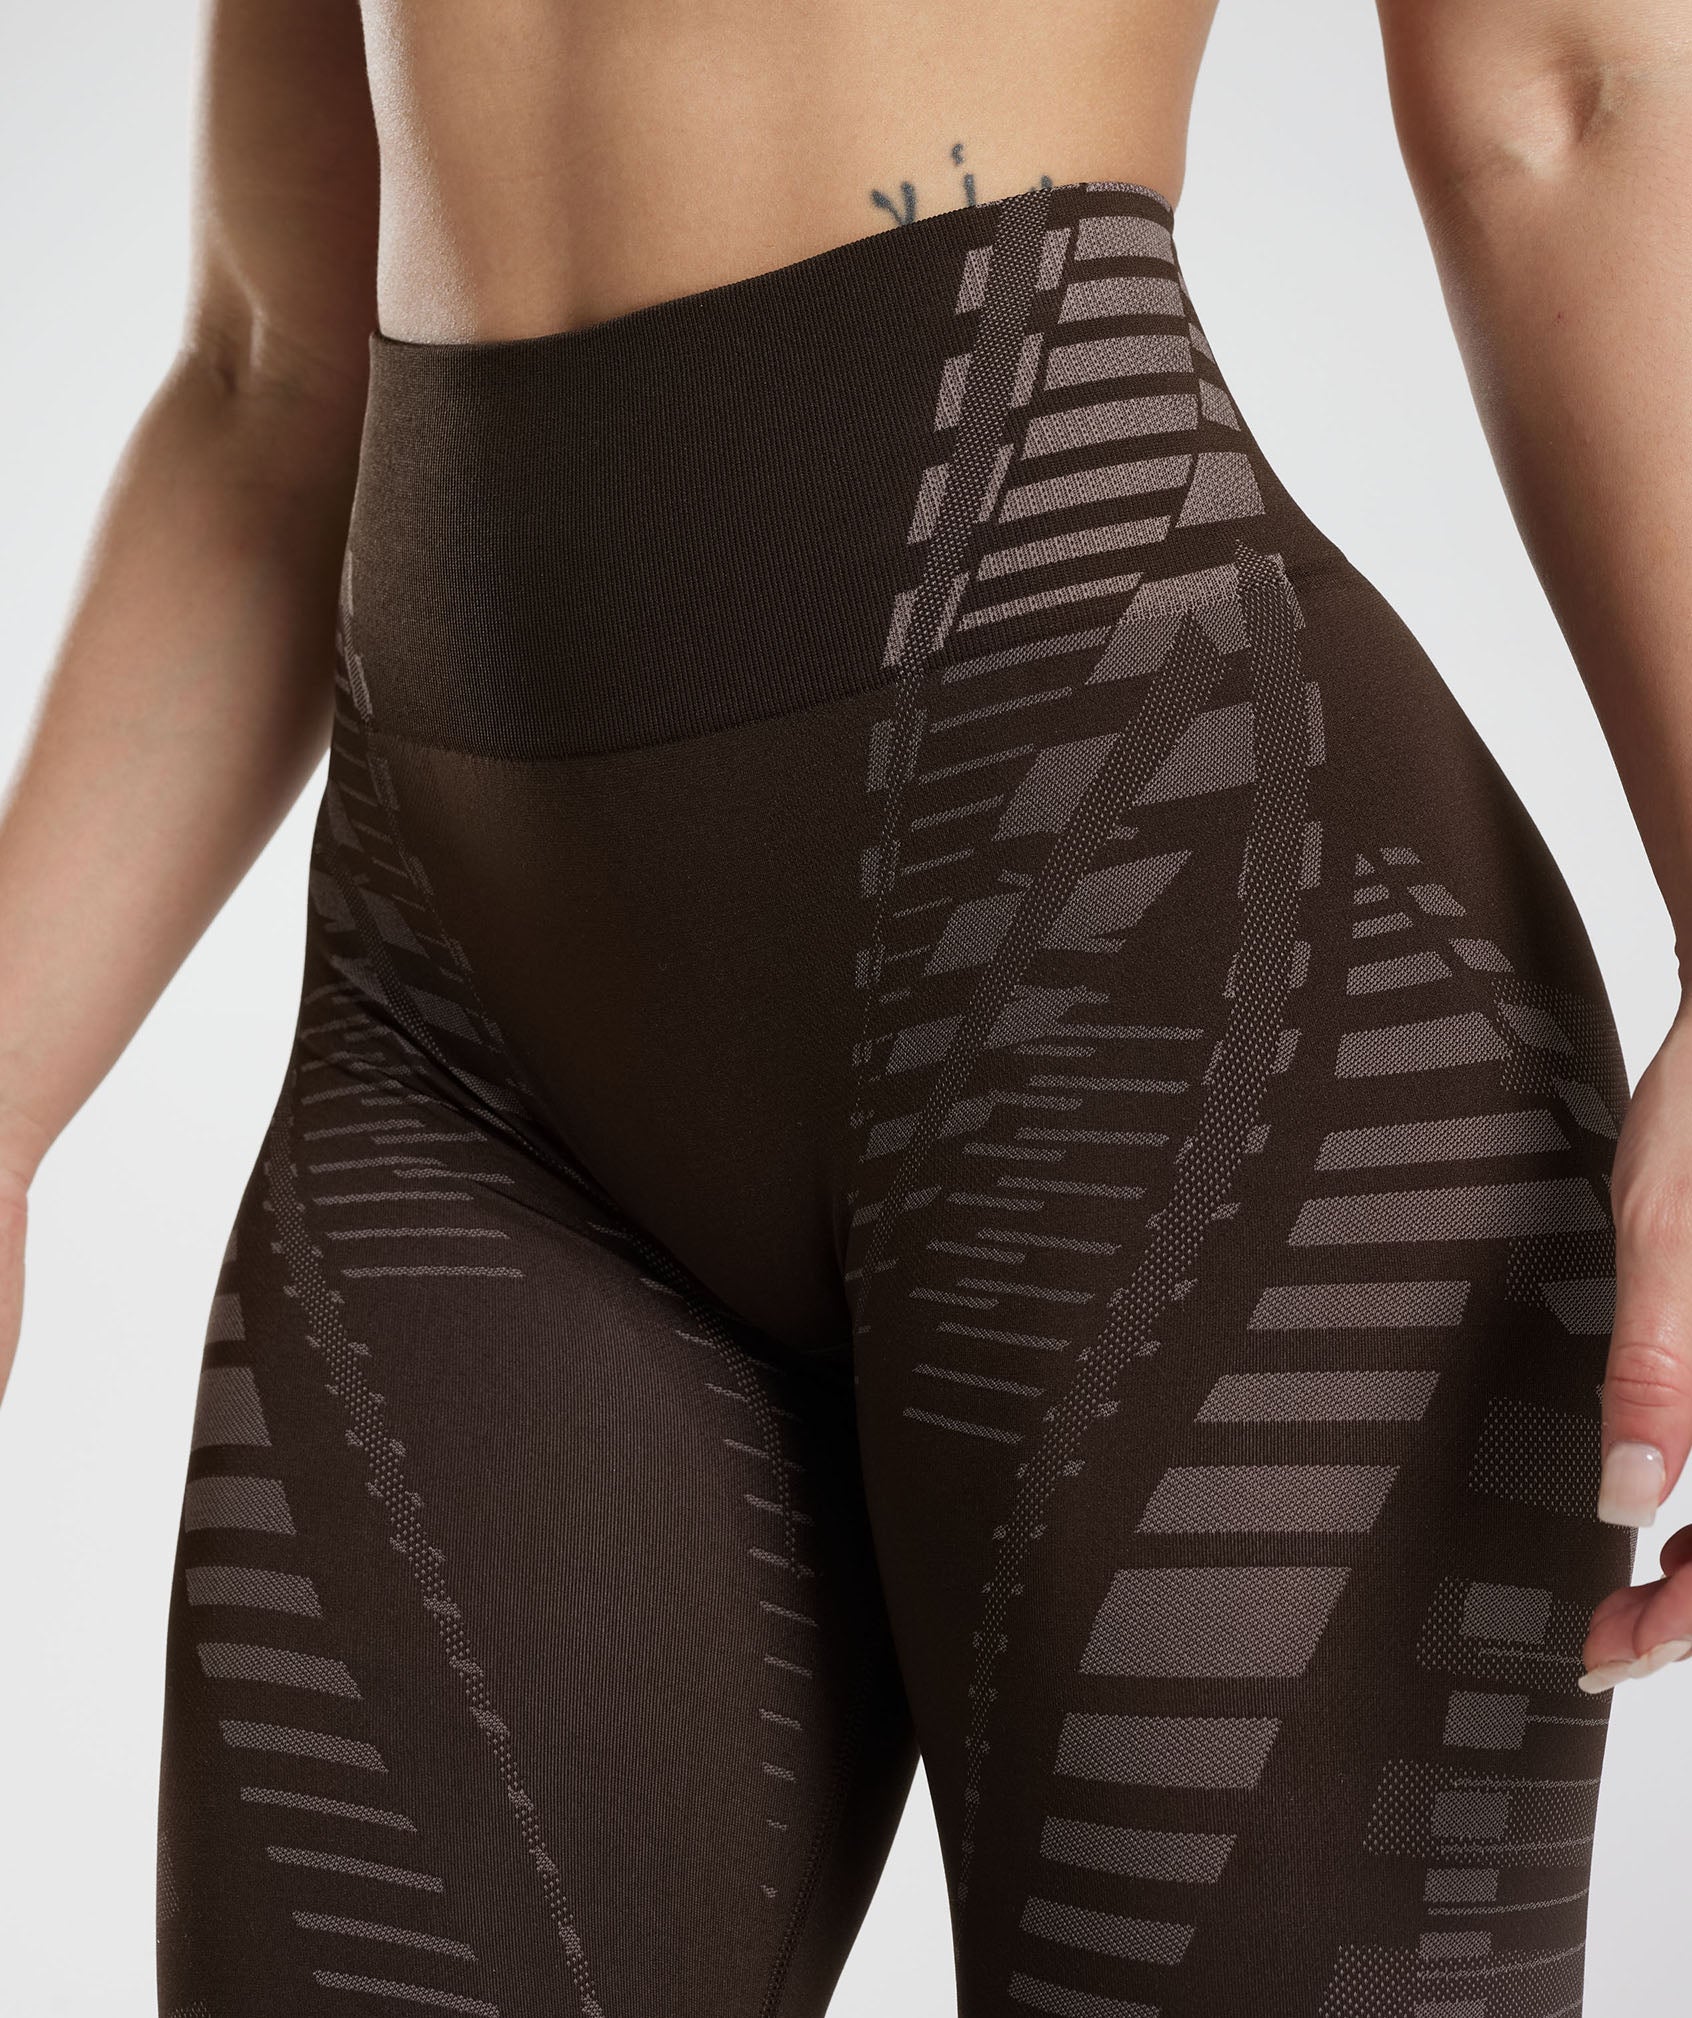 Apex Limit Leggings in Archive Brown/Truffle Brown - view 6